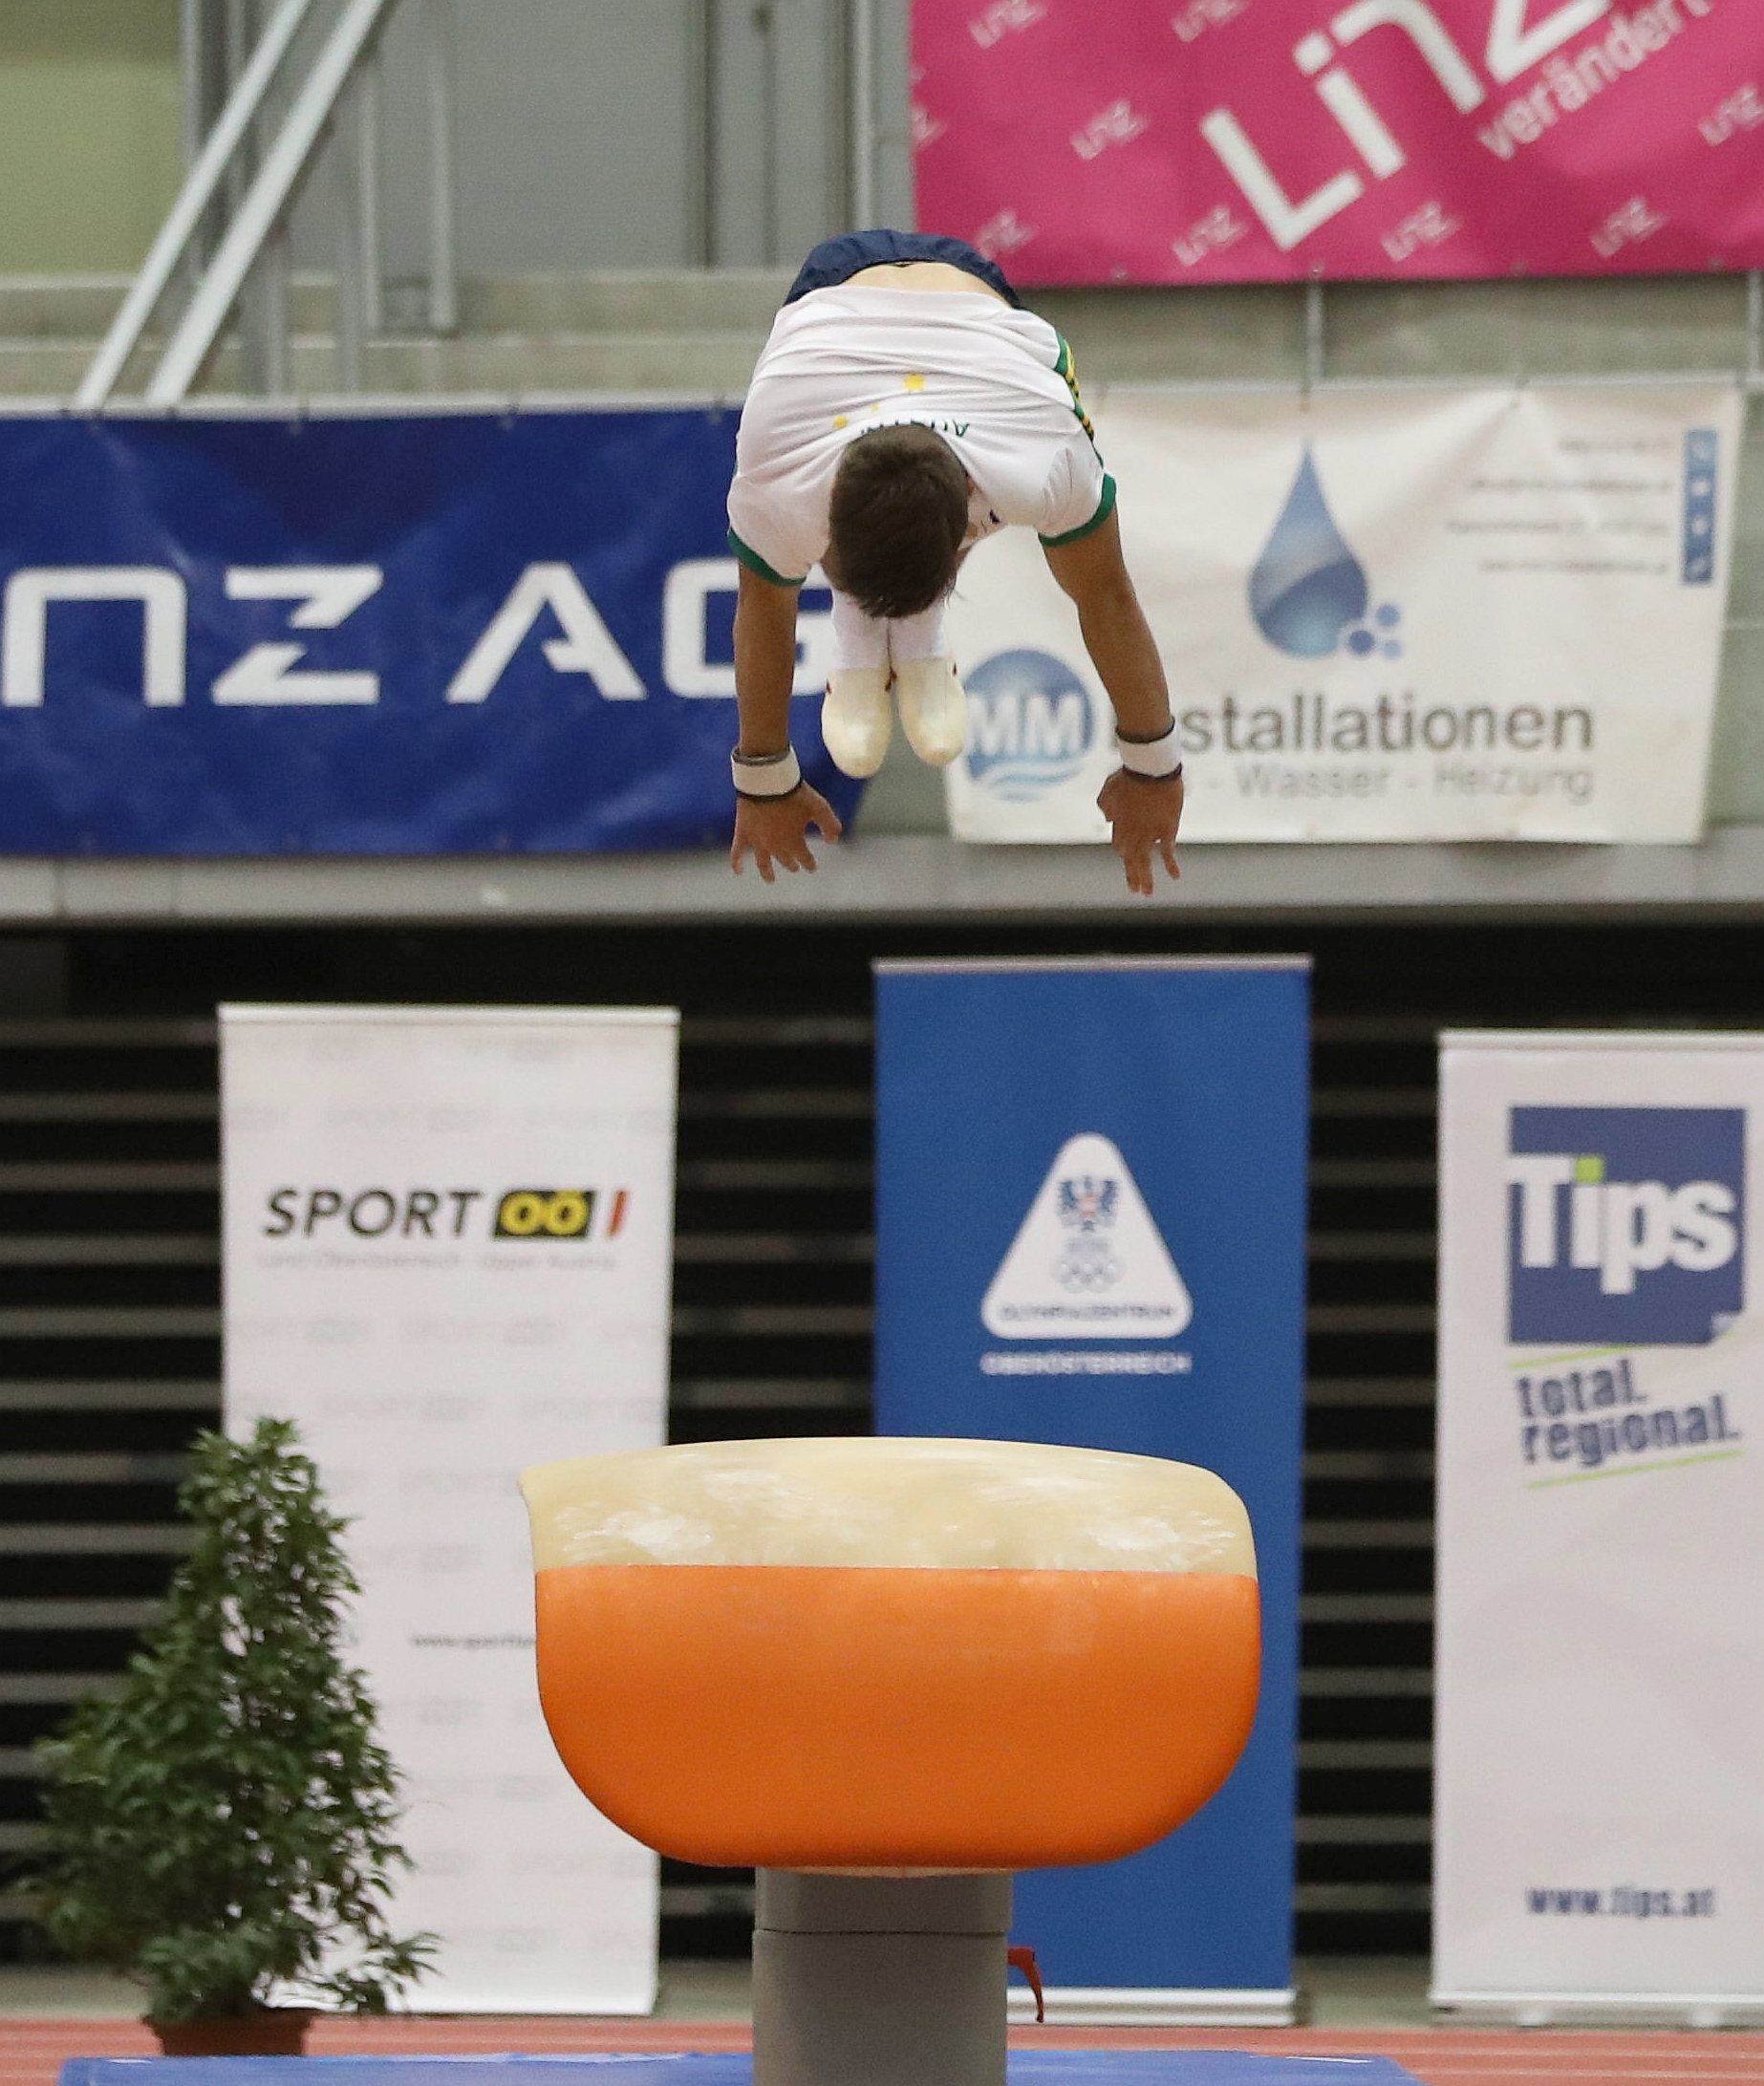 Future cup. Future a Cup. Budapest Cup Training Vault (Martin Rulsch).